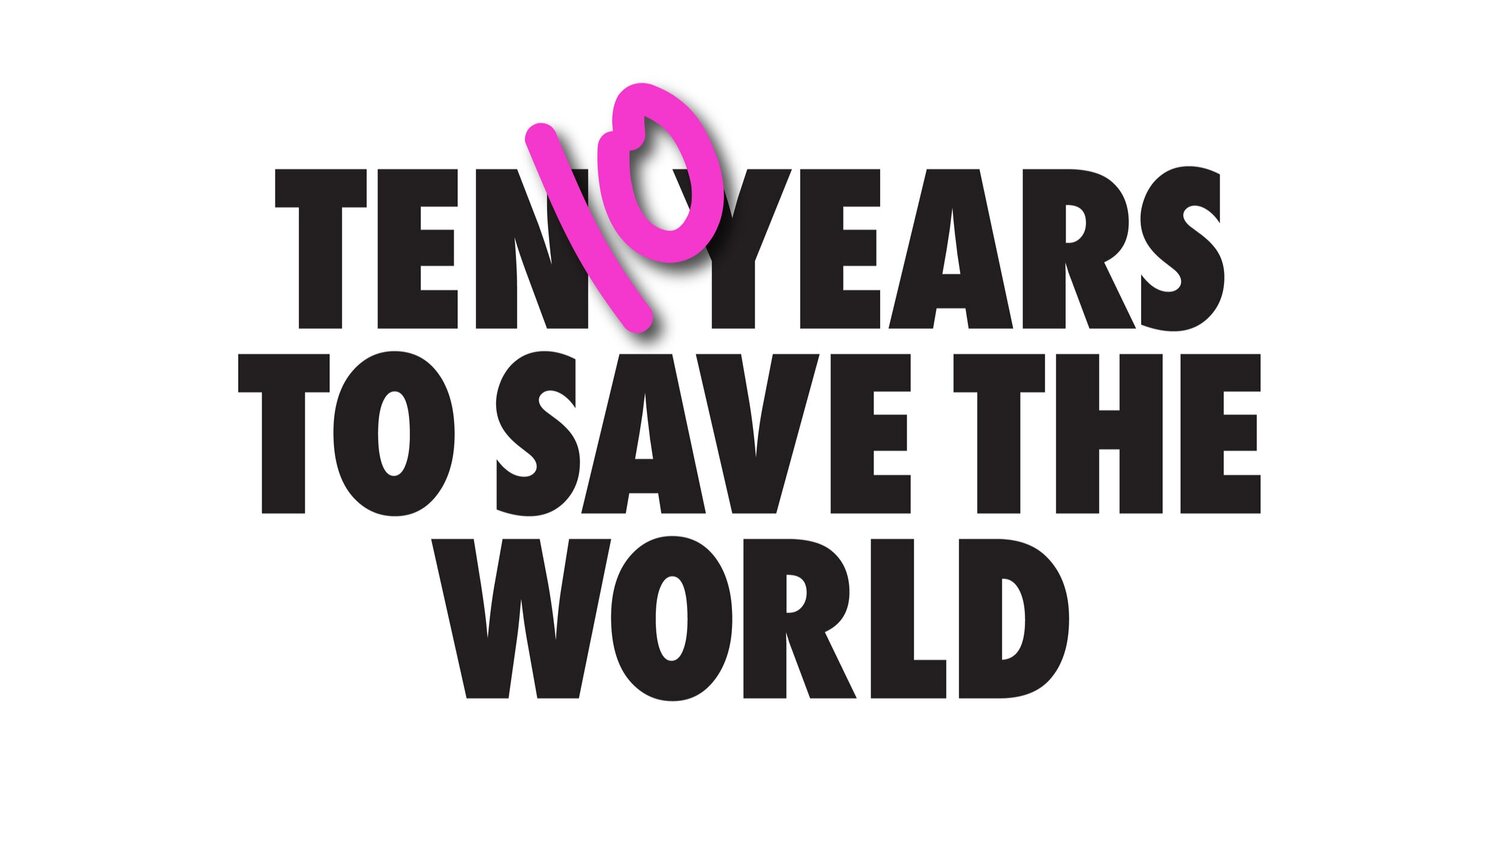 10 Years to Save the World